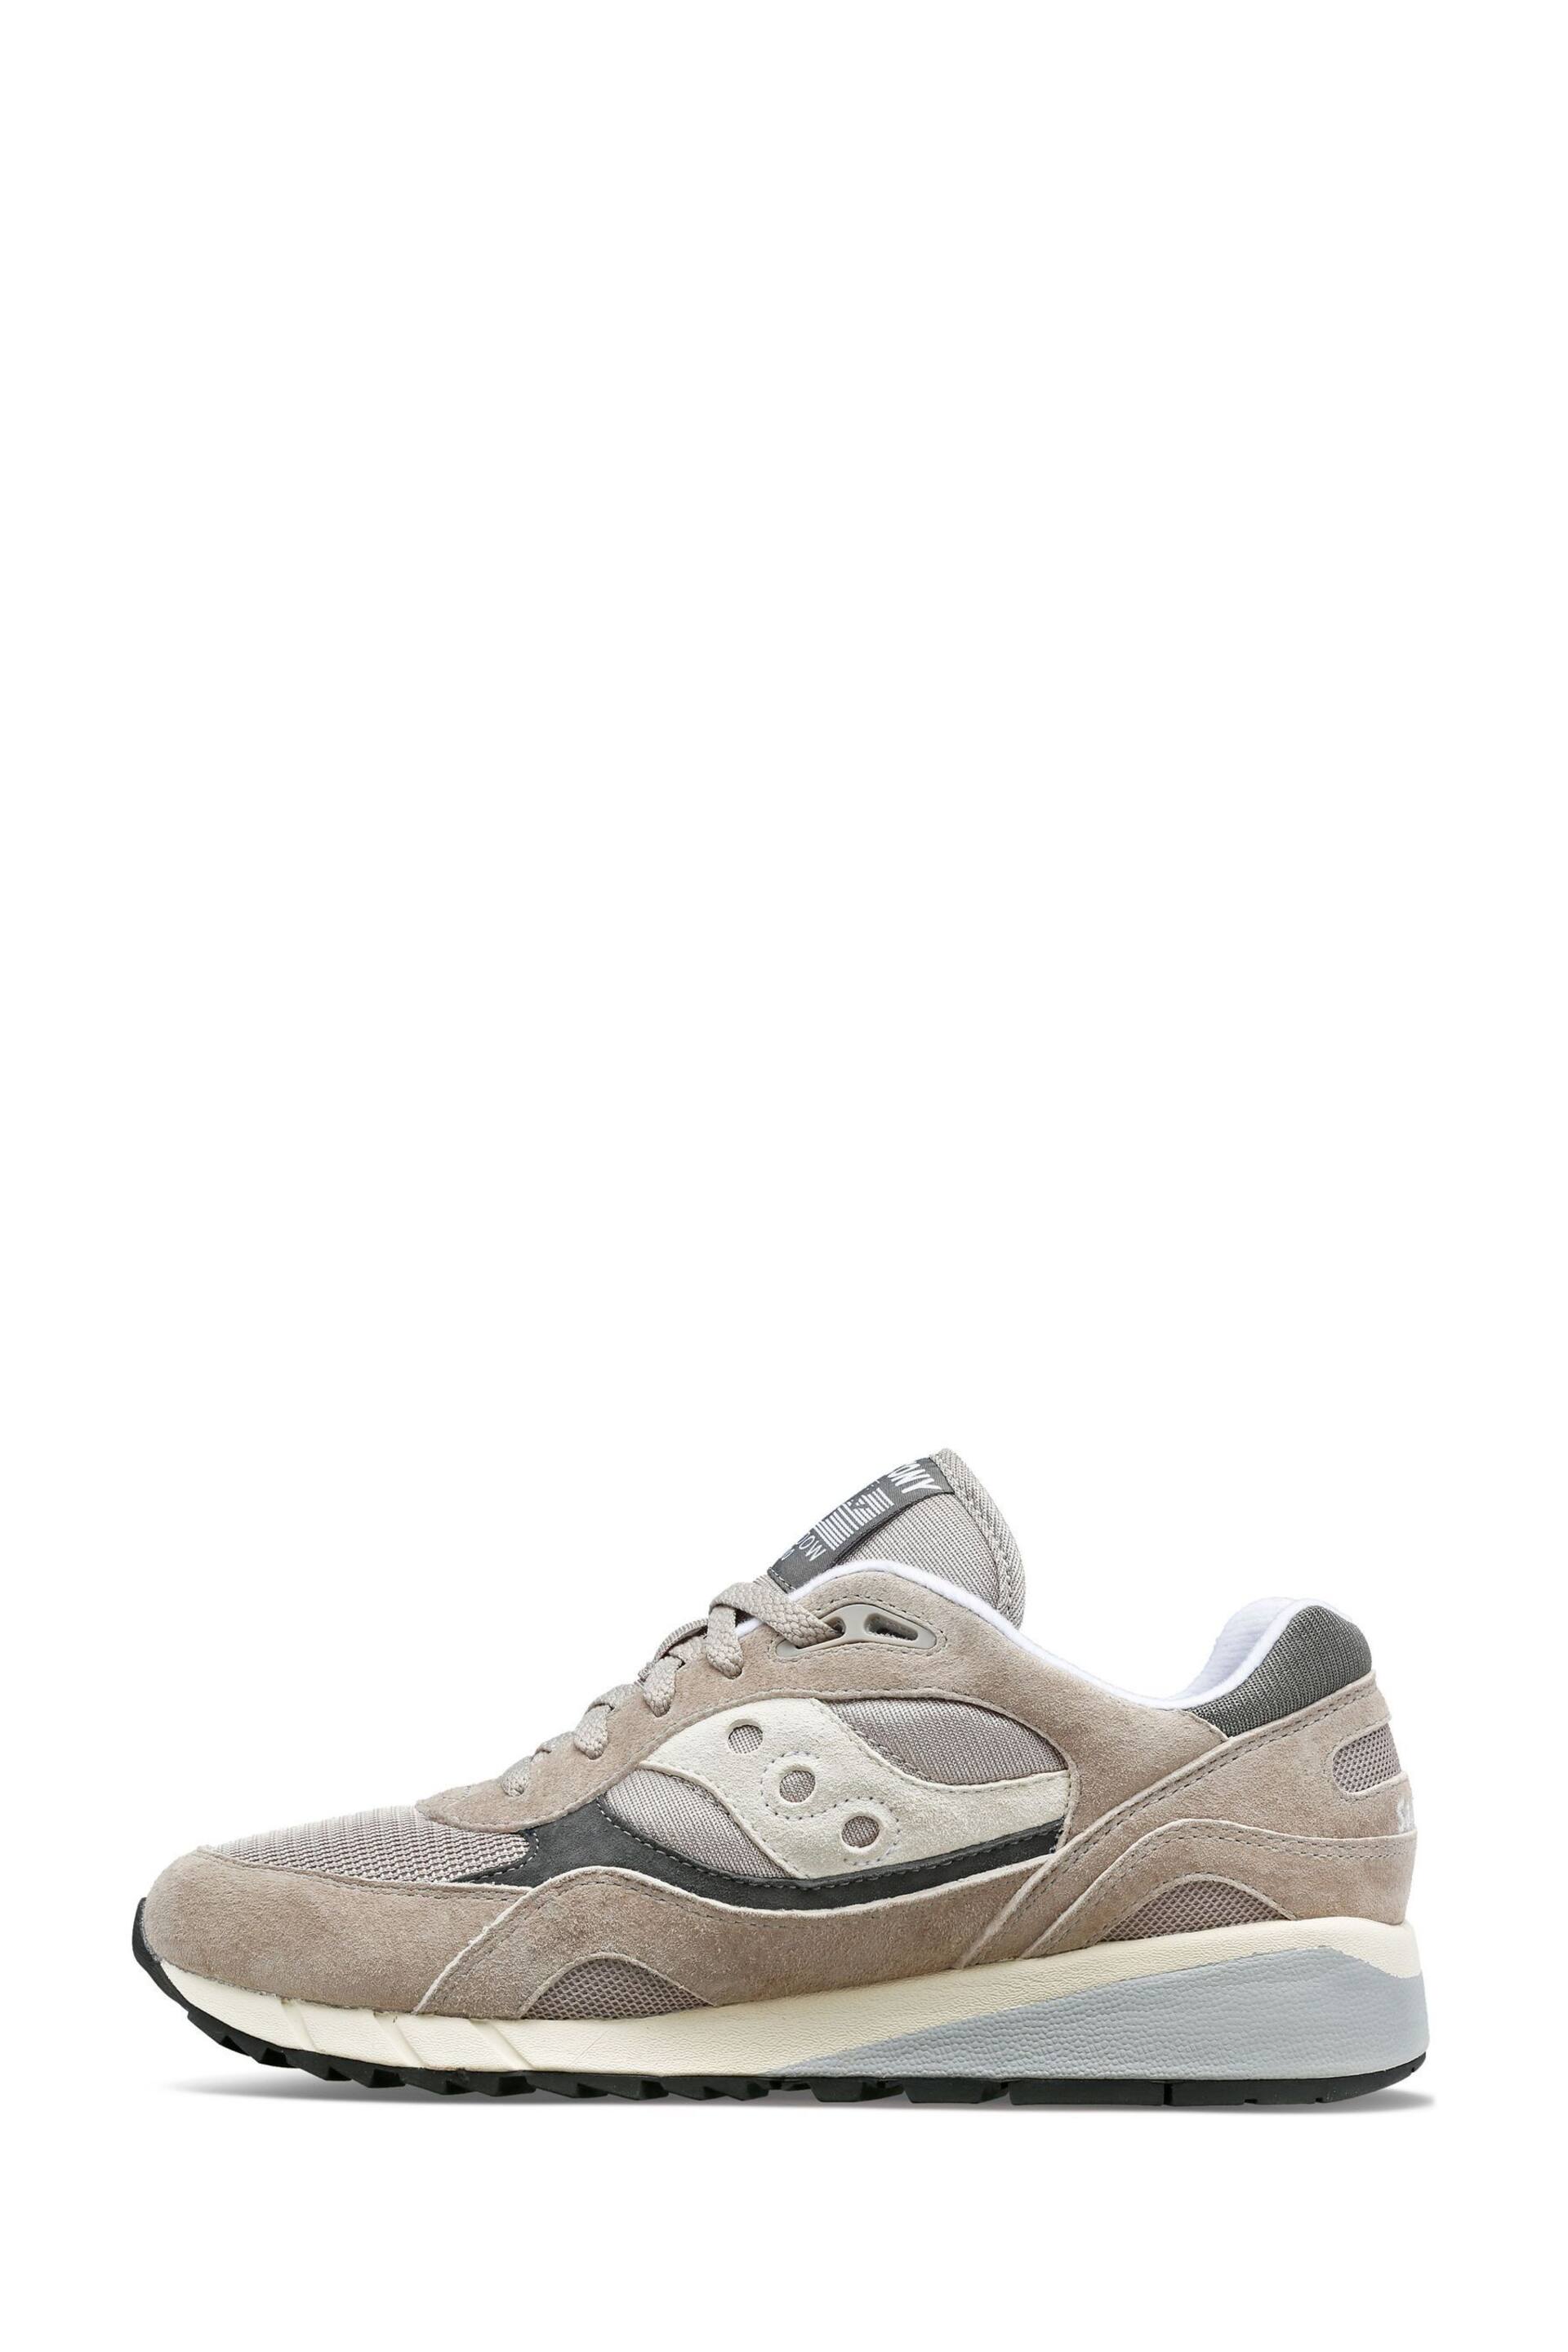 Saucony Grey Shadow 6000 Trainers - Image 3 of 5